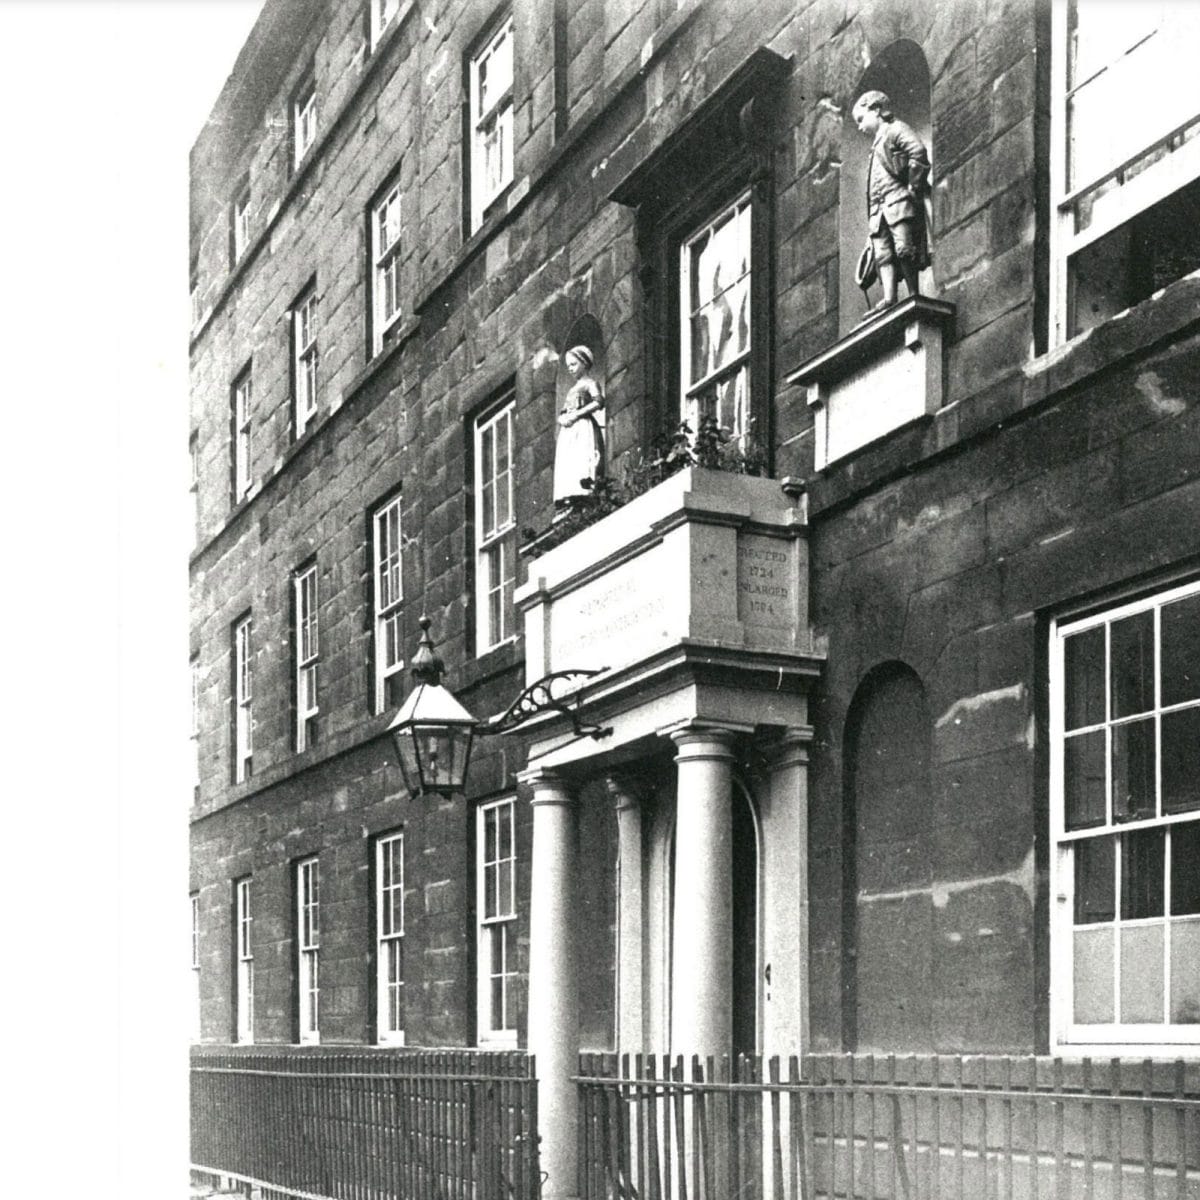 The Blue Coat Boy and Girl above the original School entrance in Colmore Row